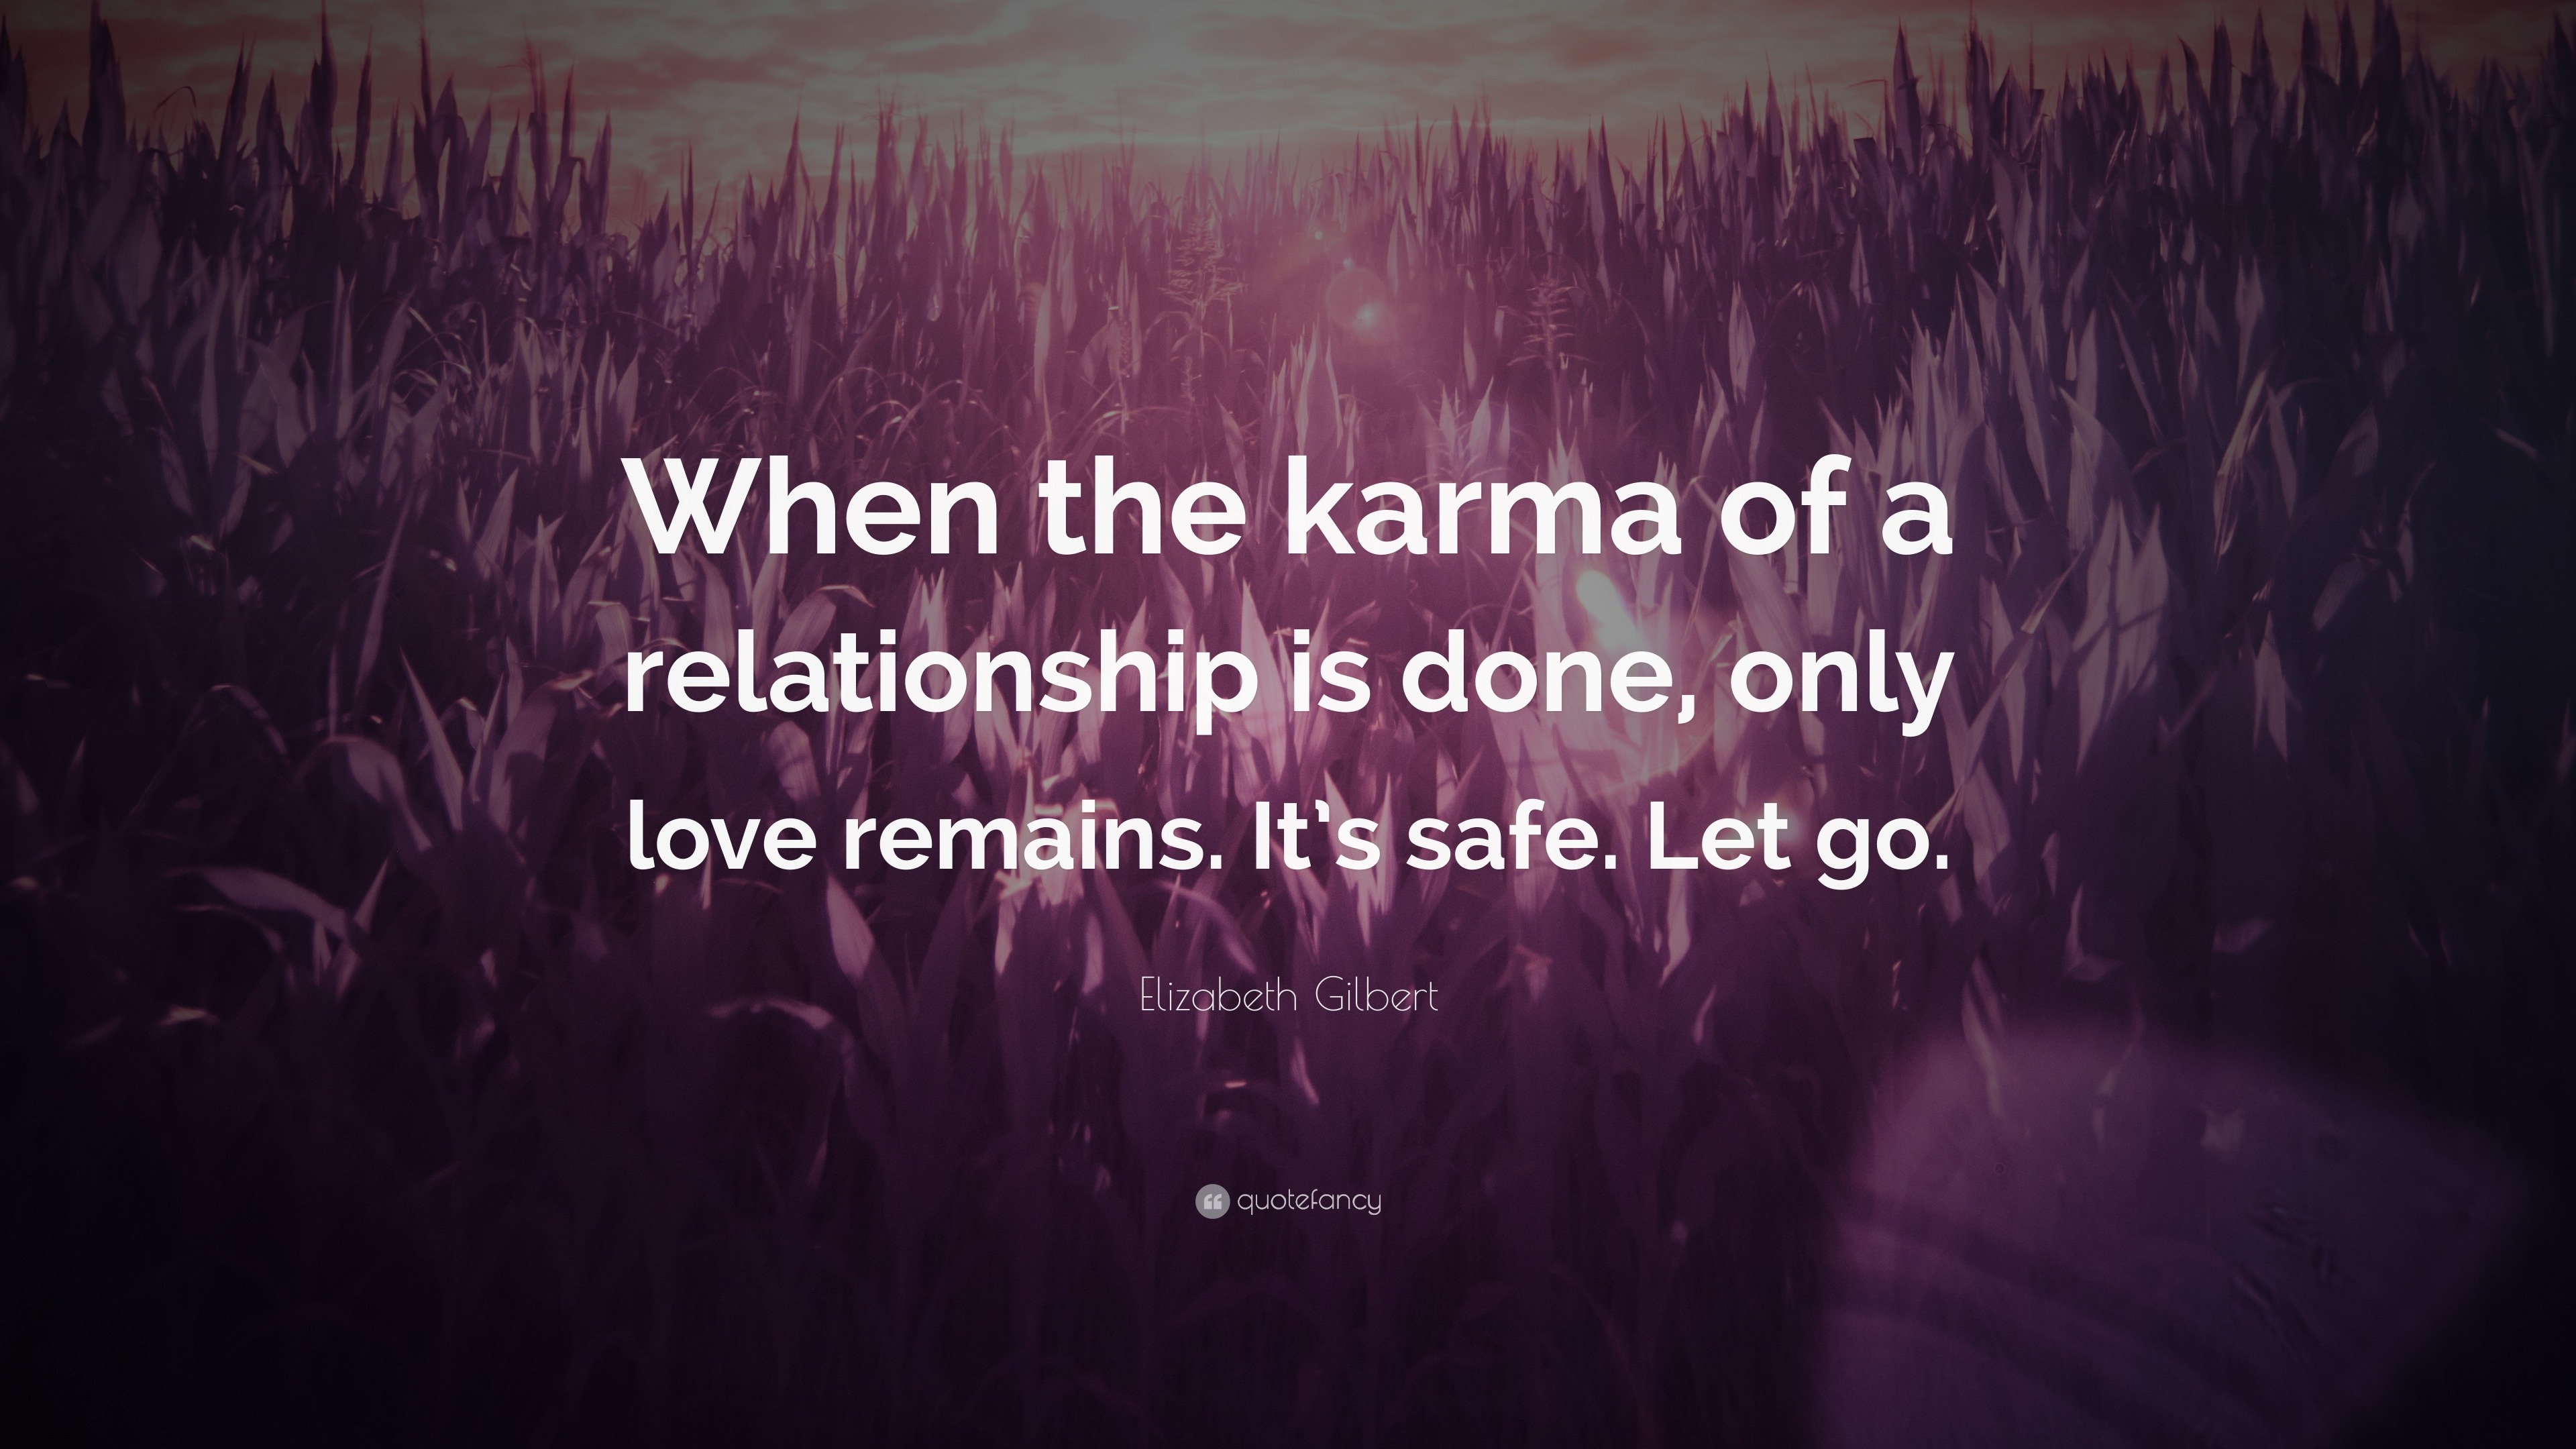 Elizabeth Gilbert Quote: "When the karma of a relationship is done, only love remains. It's safe ...